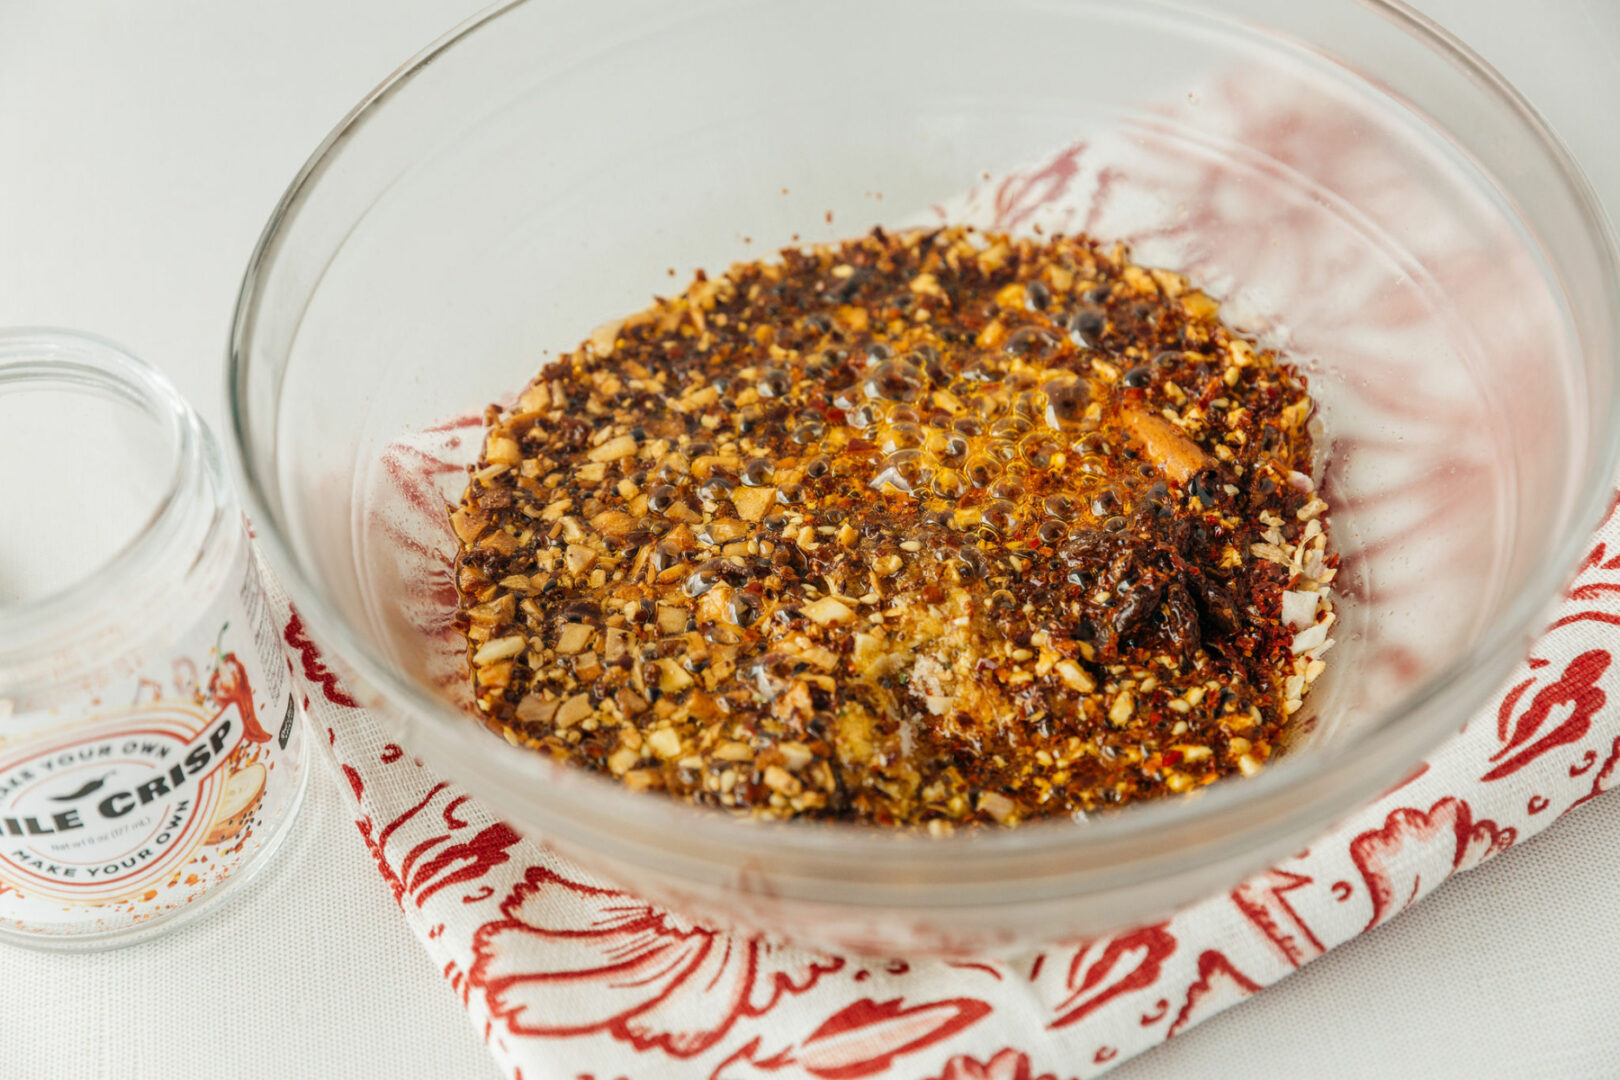 MAKE YOUR OWN CHILE CRISP